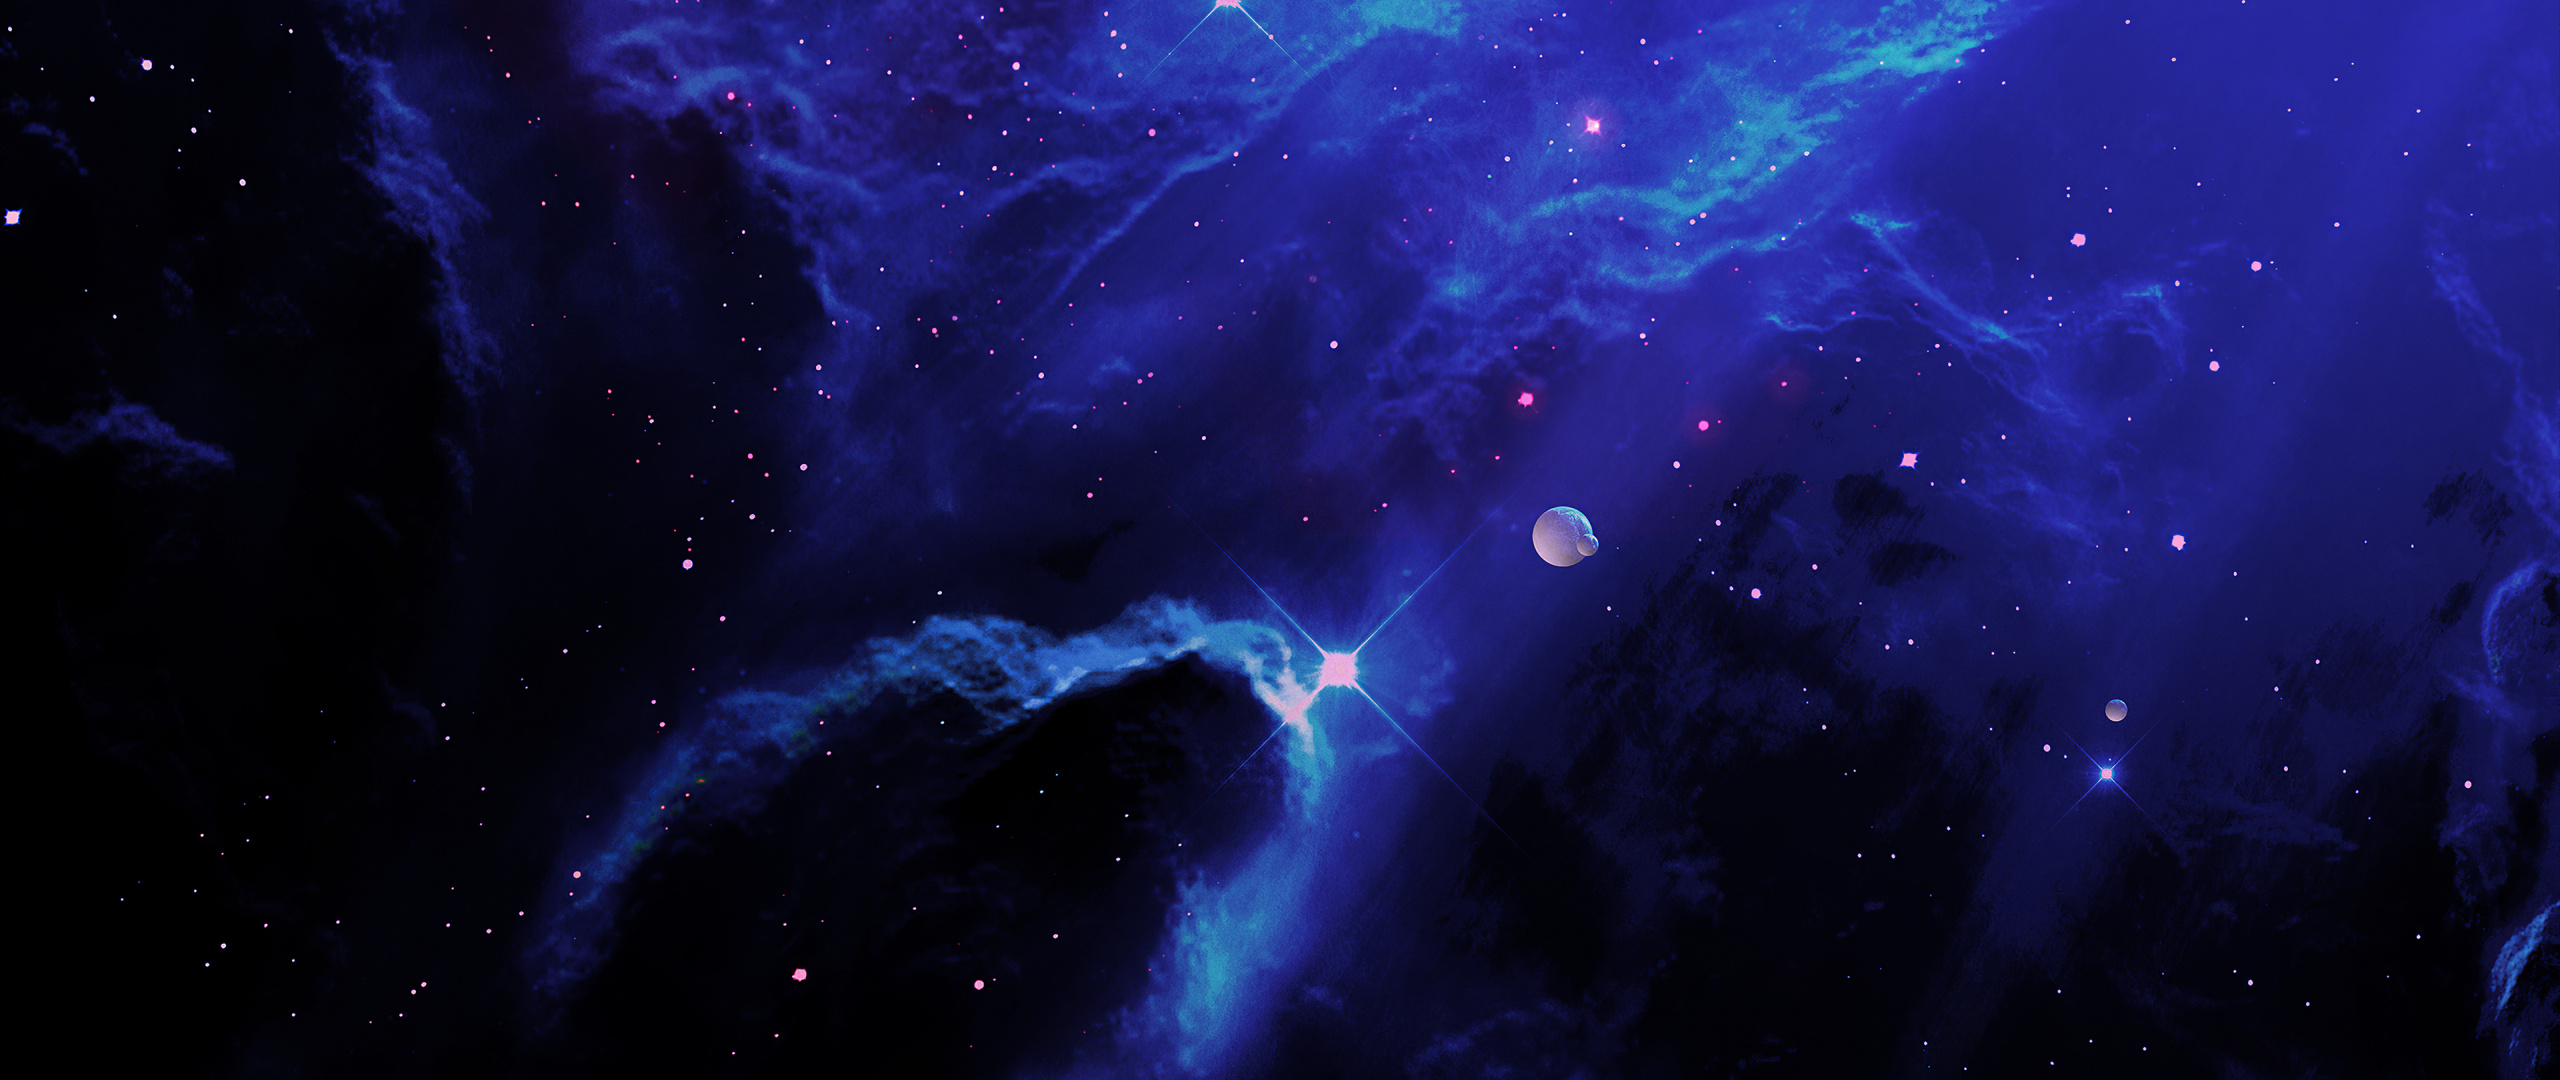 Download Blue and dark clouds, cosmos, dark realm, fantasy, planets wallpaper, 2560x Dual Wide, Widescreen